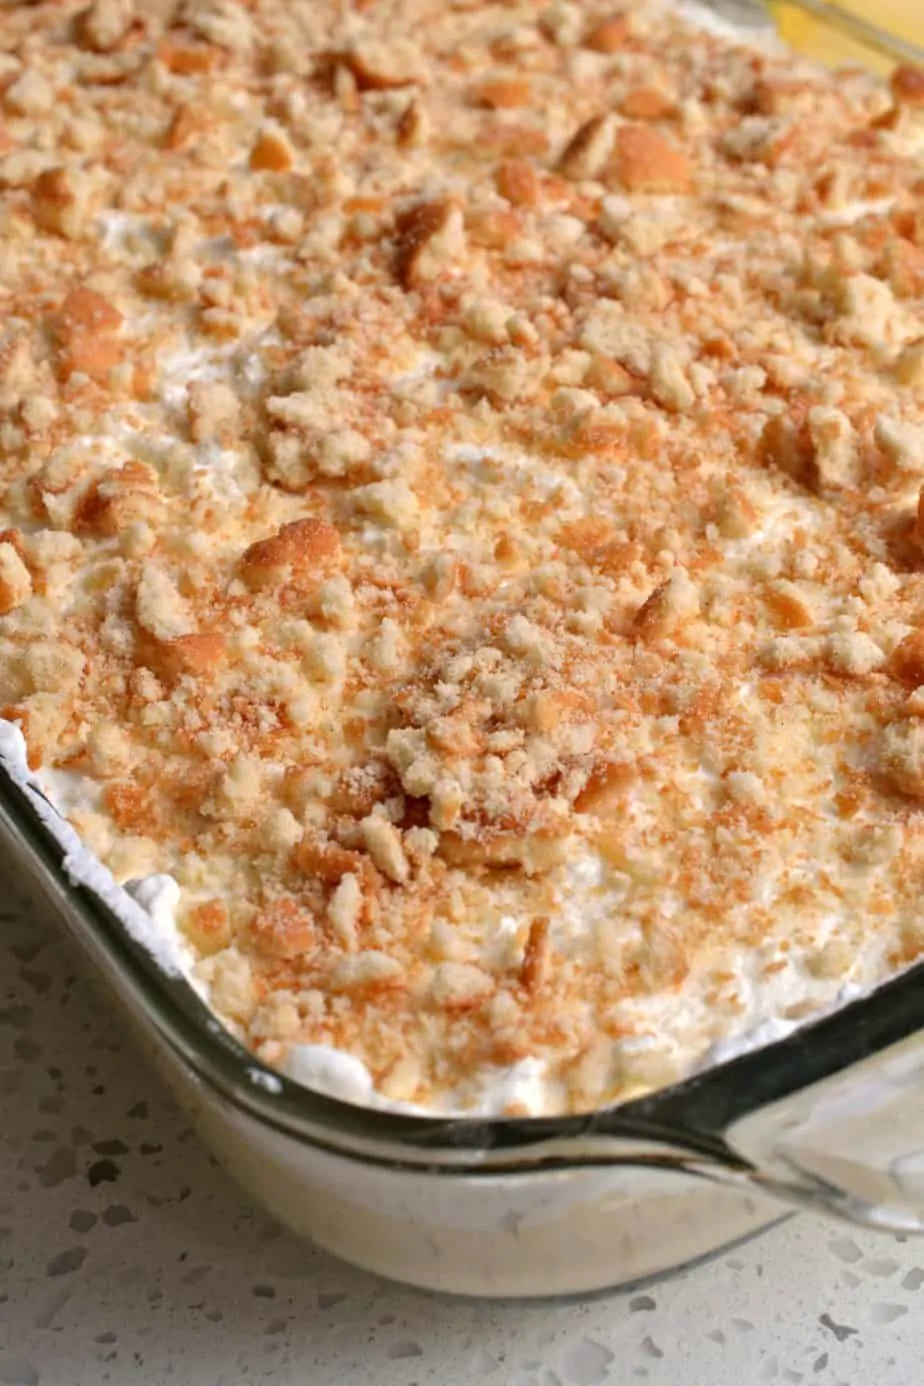 This completely from-scratch banana pudding is topped with fresh whipped cream and crumbled vanilla wafers